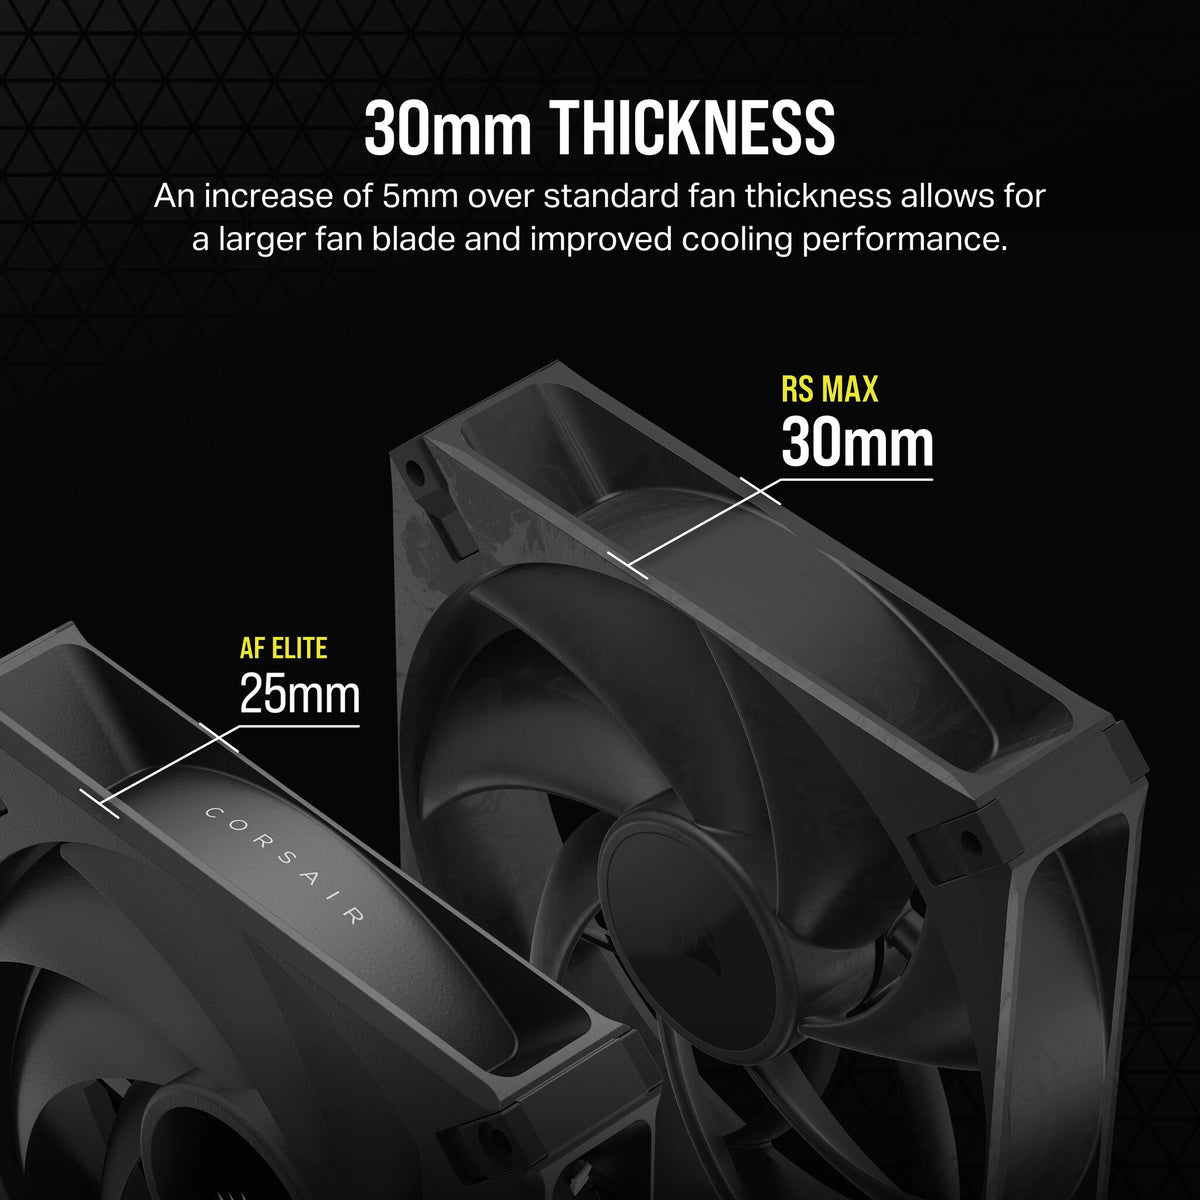 Corsair RS140 MAX - Computer Case Fan in Black - 140mm